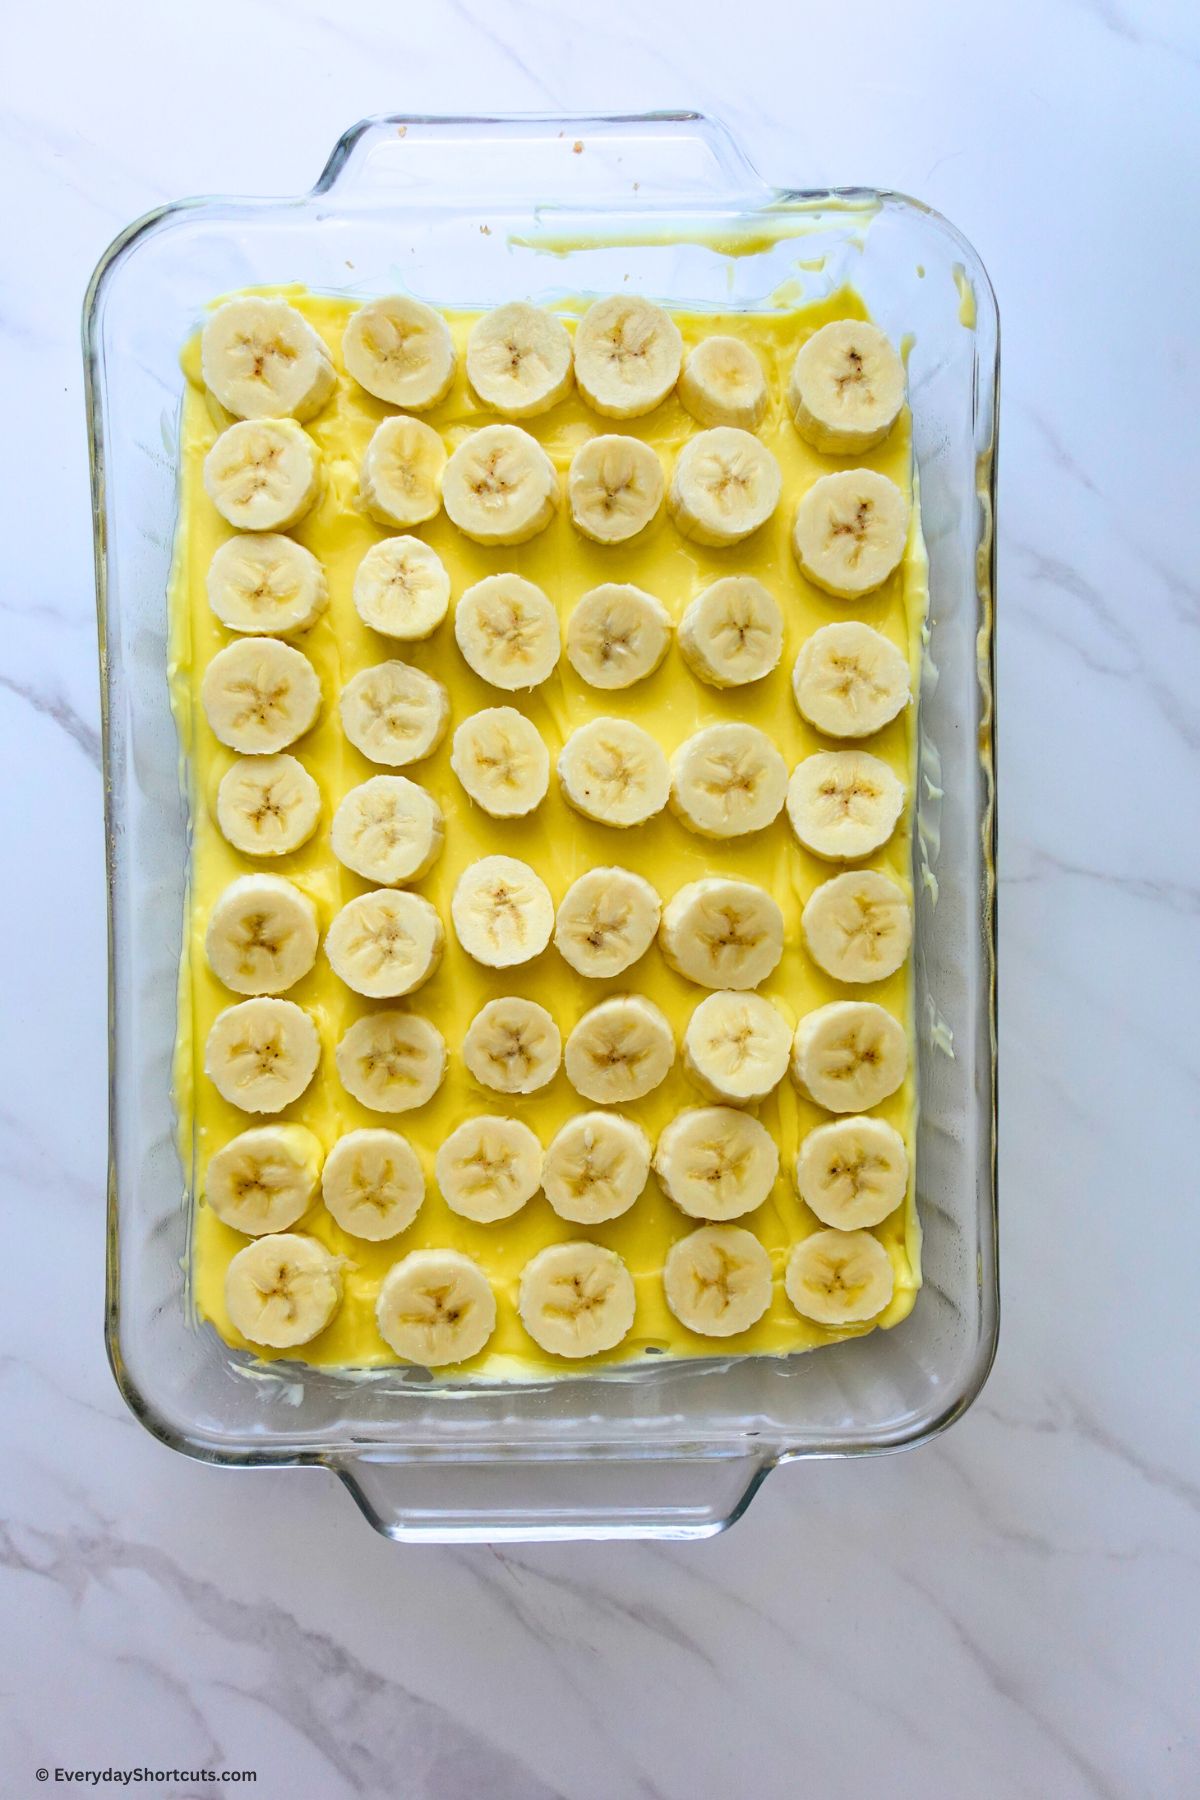 sliced bananas on top of creamy pudding layer in baking dish